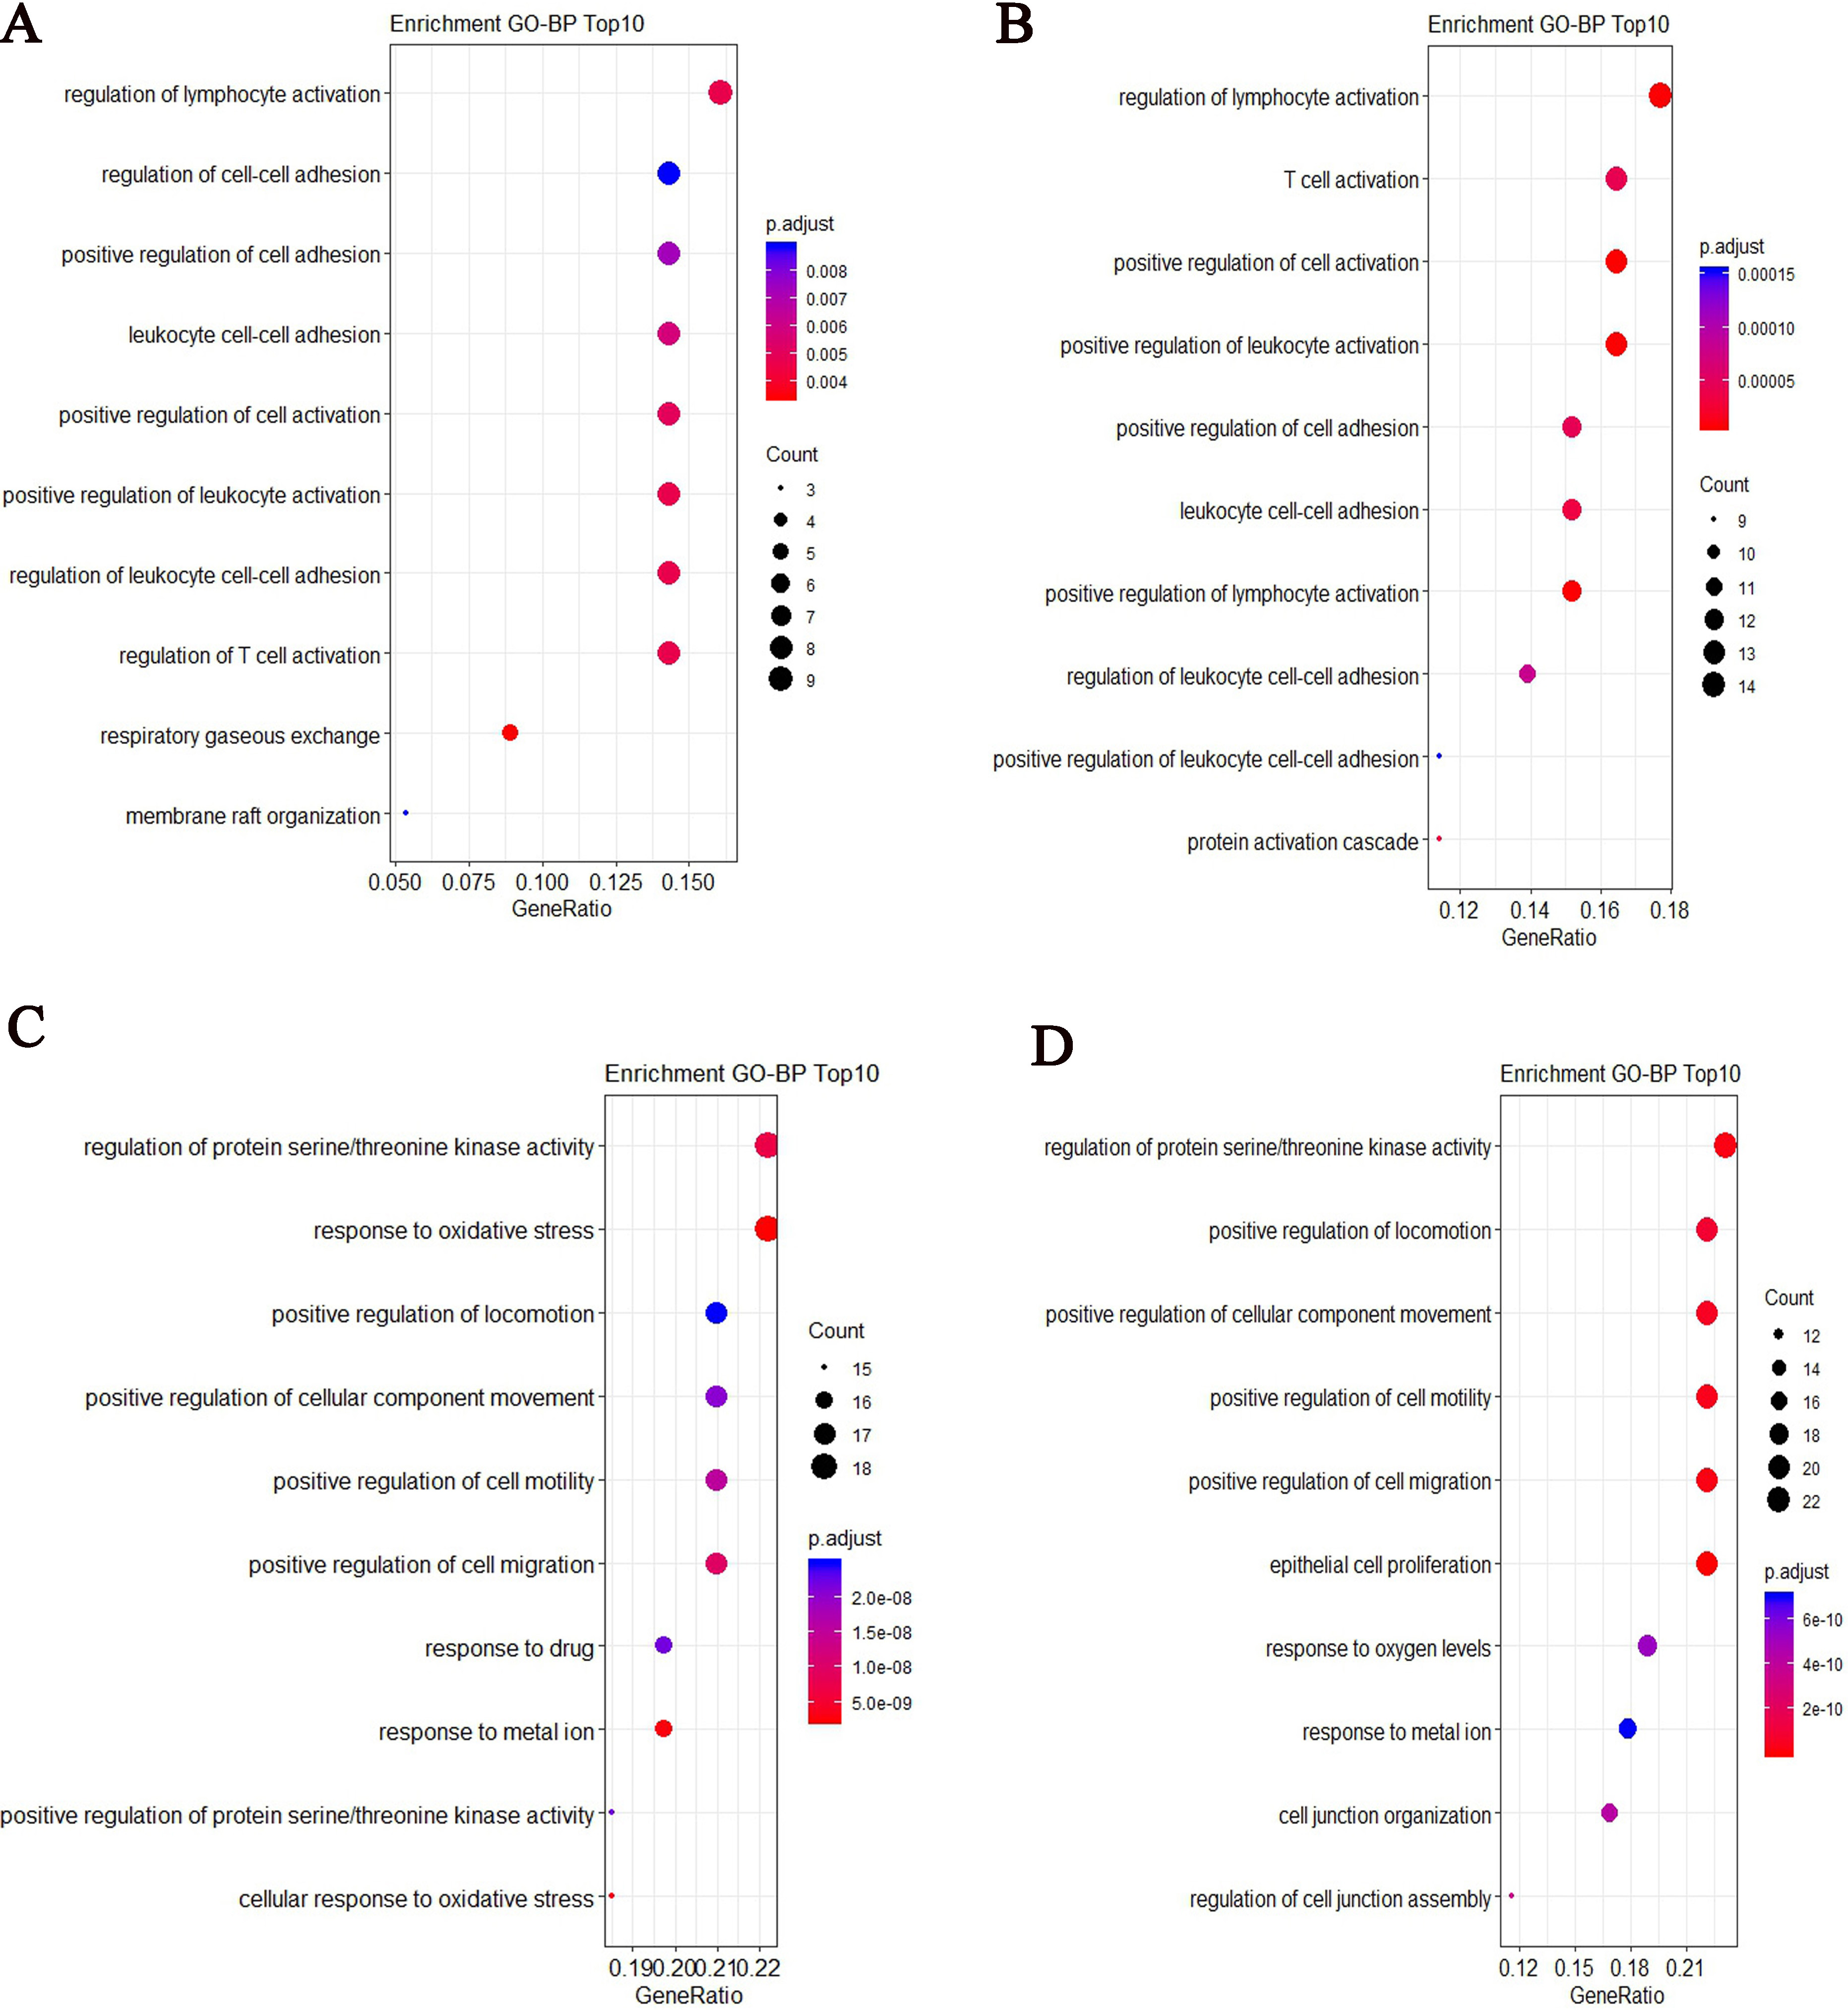 GO-BP enrichment results based on the top ranked differentially expressed mRNAs and target genes of differentially expressed lncRNAs for COPD and controls respectively. (A) The top 10 most significant GO-BP terms based on the top ranked differentially expressed mRNAs for COPD (B) The top 10 most significant GO-BP terms based on the top ranked differentially expressed mRNAs for controls (C) The top 10 most significant GO-BP terms based on targets of differentially expressed lncRNAs for COPD (D) The top 10 most significant GO-BP terms based on targets of differentially expressed lncRNAs for controls.